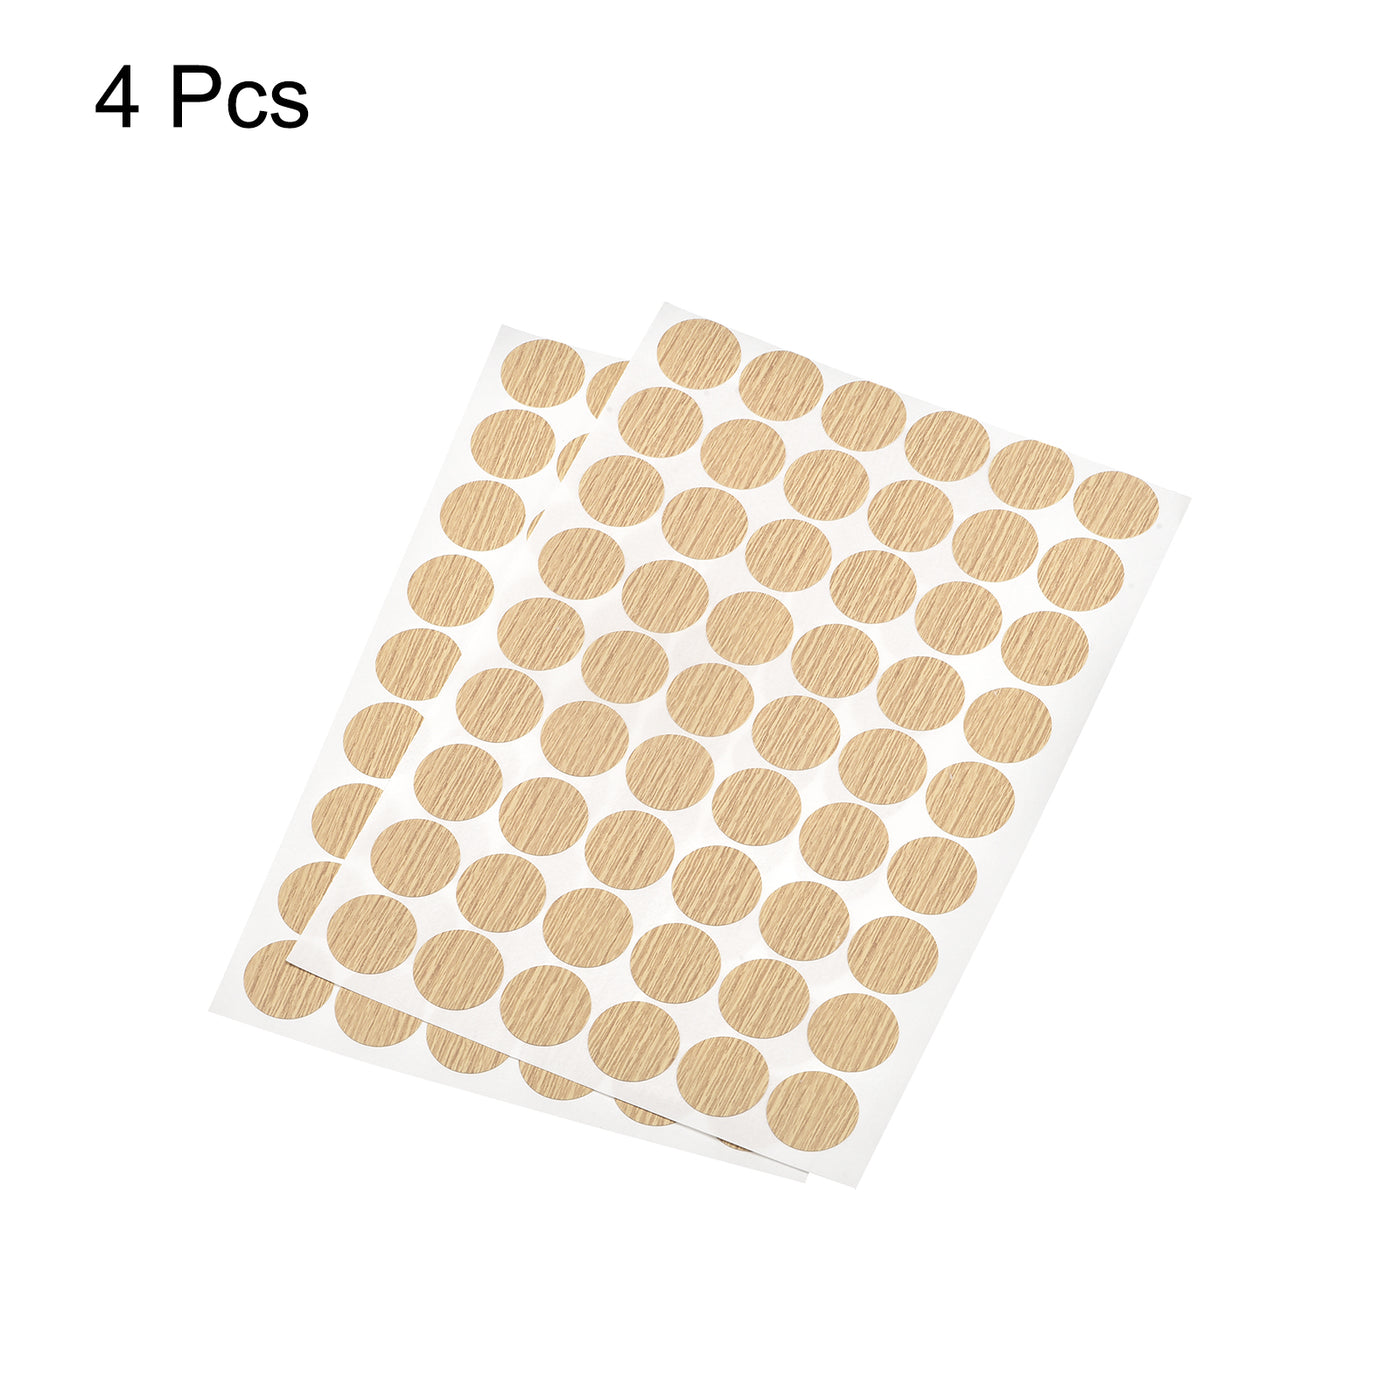 uxcell Uxcell Screw Hole Cover Stickers, 21mm Dia PVC Self Adhesive Covers Caps for Wood Furniture Cabinet Shelf Wardrobe, Oak 4 Sheet/216pcs